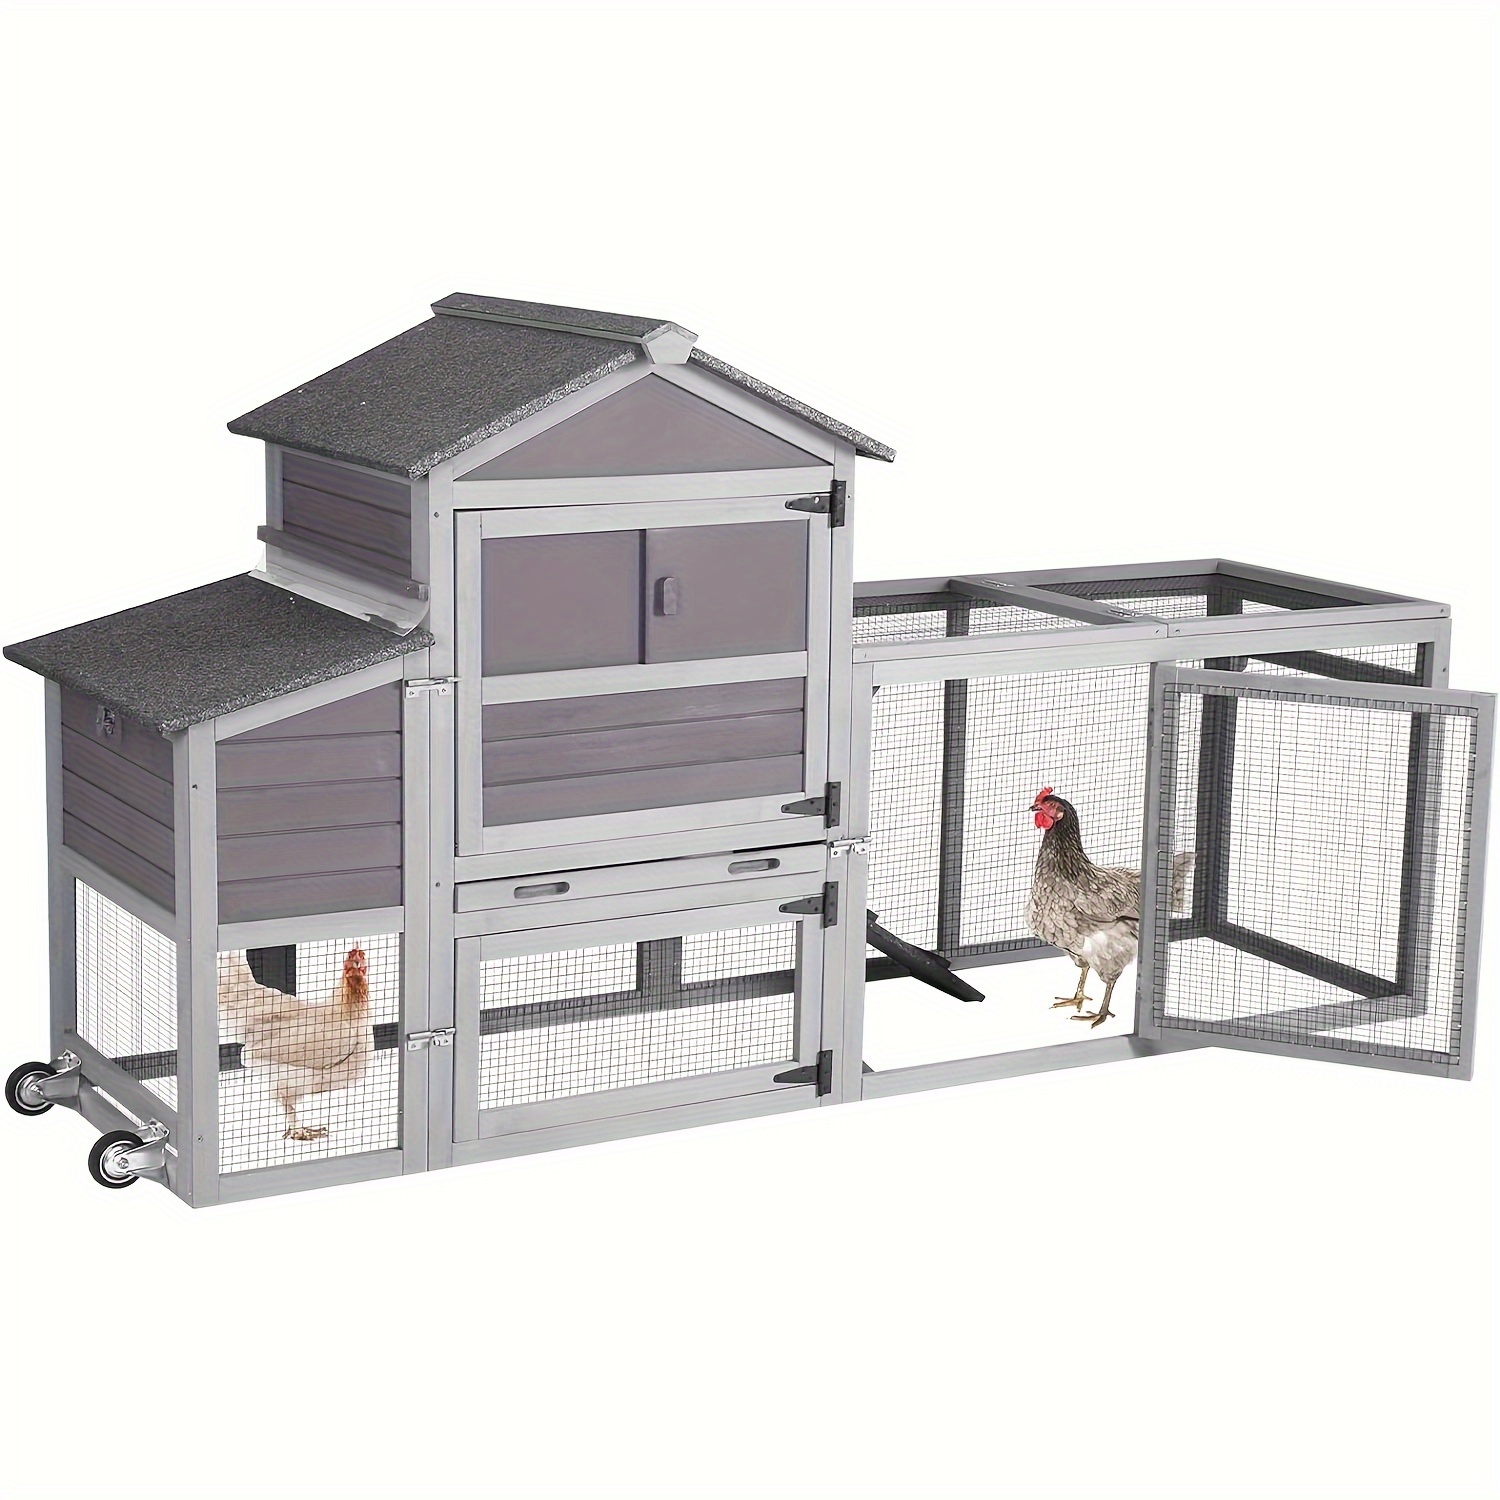 

Aivituvin Chicken Coop, Wooden Poultry Cage With Nesting Box, Mobile Hen House On Wheels, Opening Wire Netting Roof